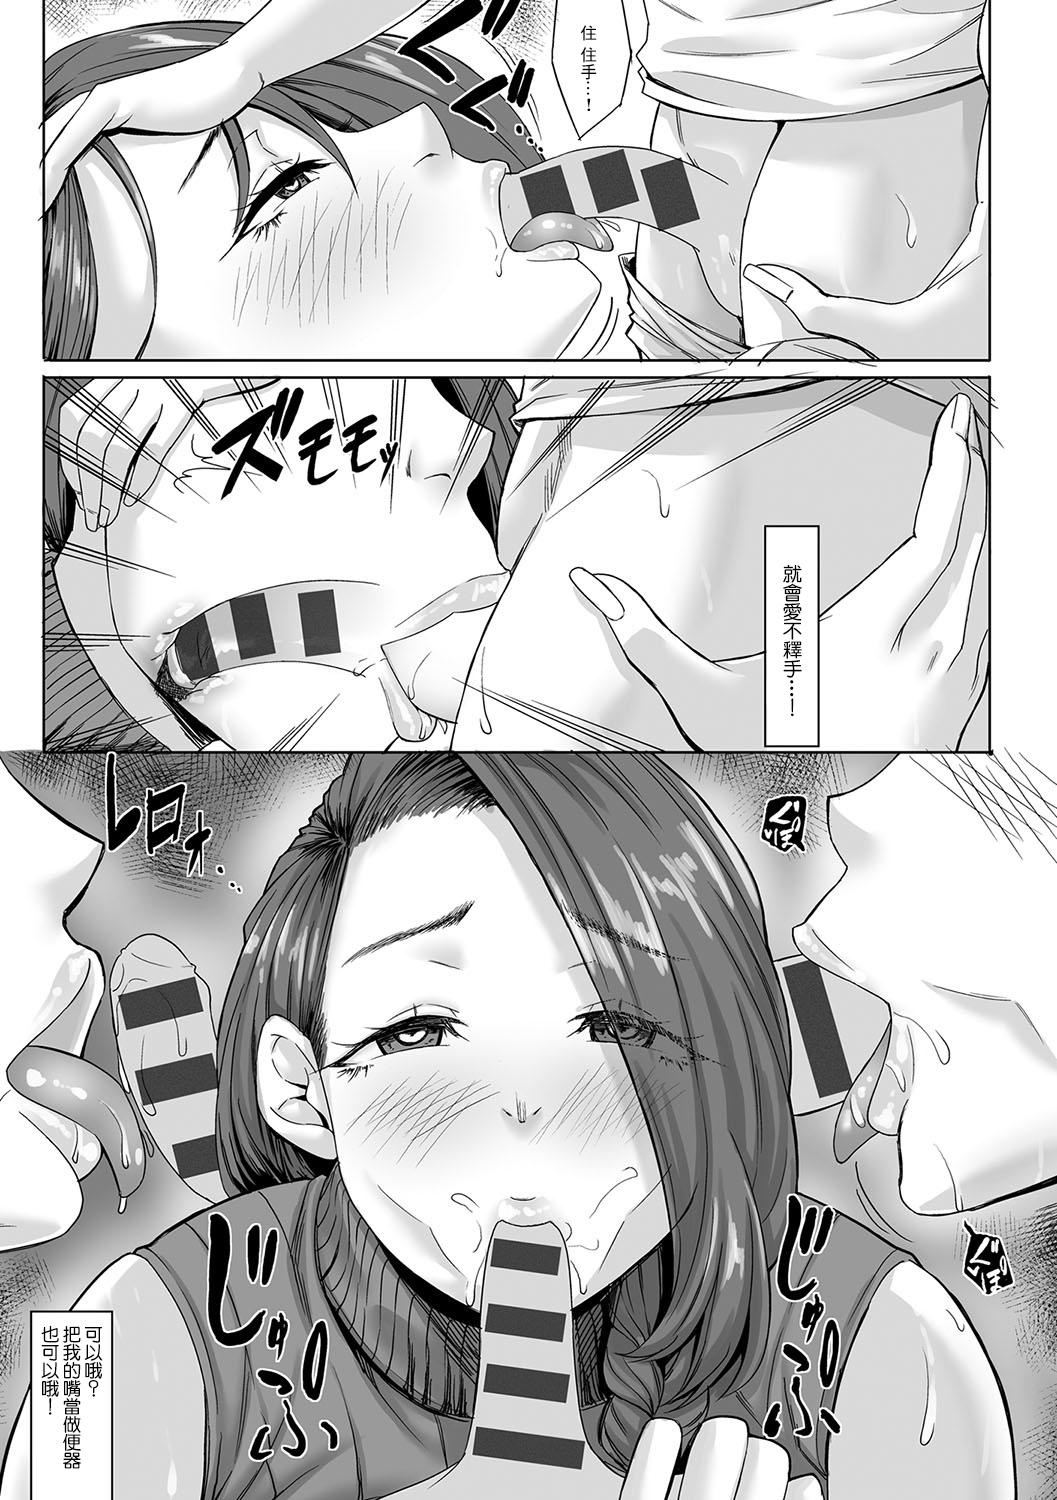 Older Aカップの彼女よりJカップの黒ギャルの方が良いよね After Nudes - Page 11